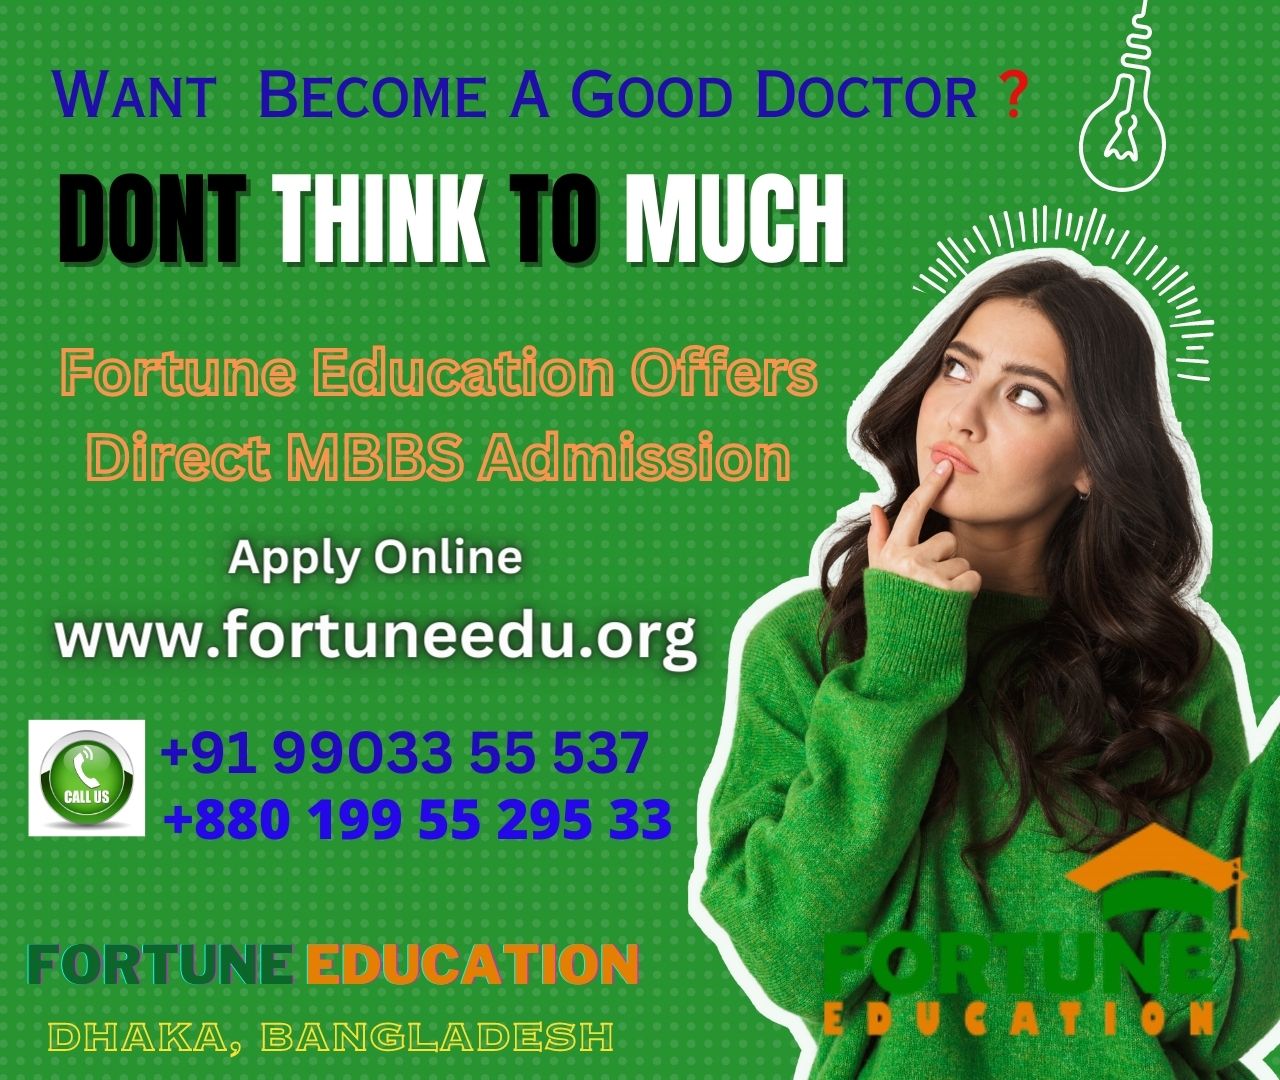 Want to Become a Good Doctor